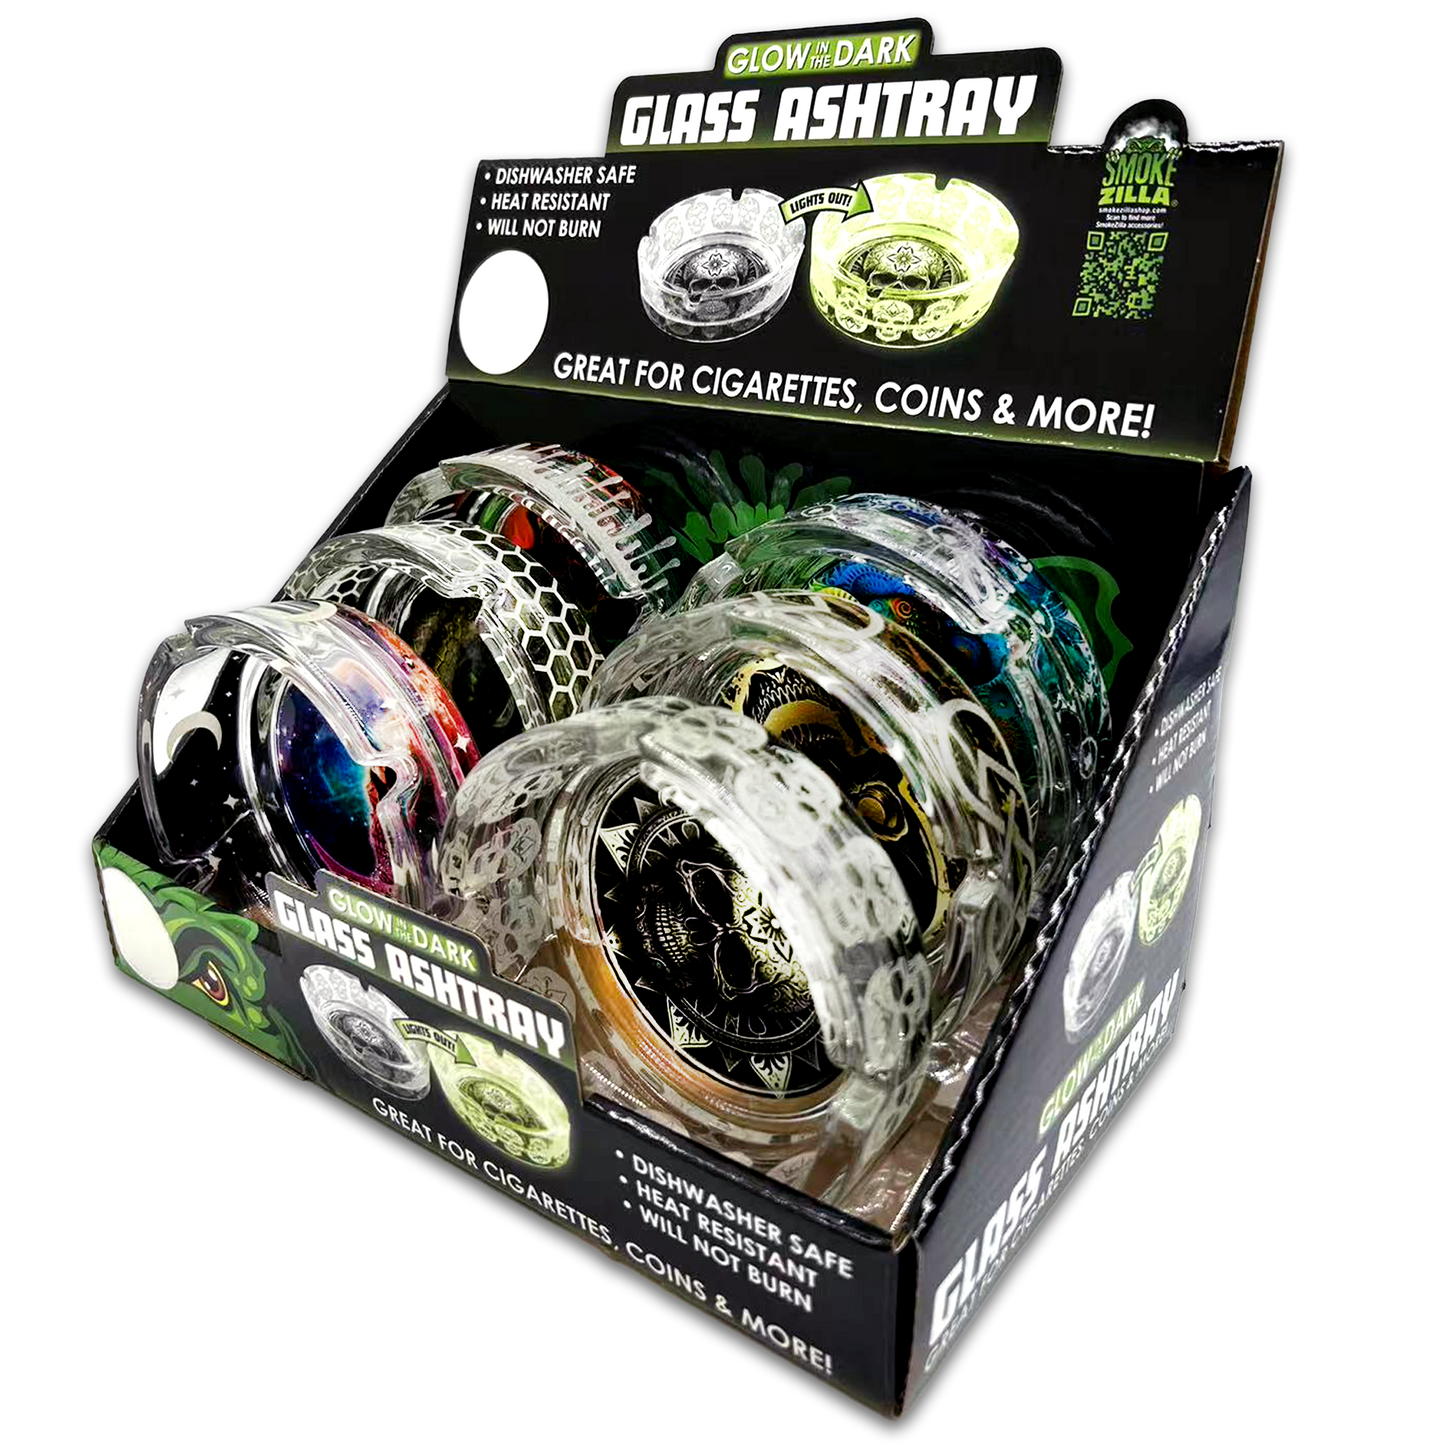 ITEM NUMBER 023719 GID GLASS ASHTRAY 6 PIECES PER DISPLAY